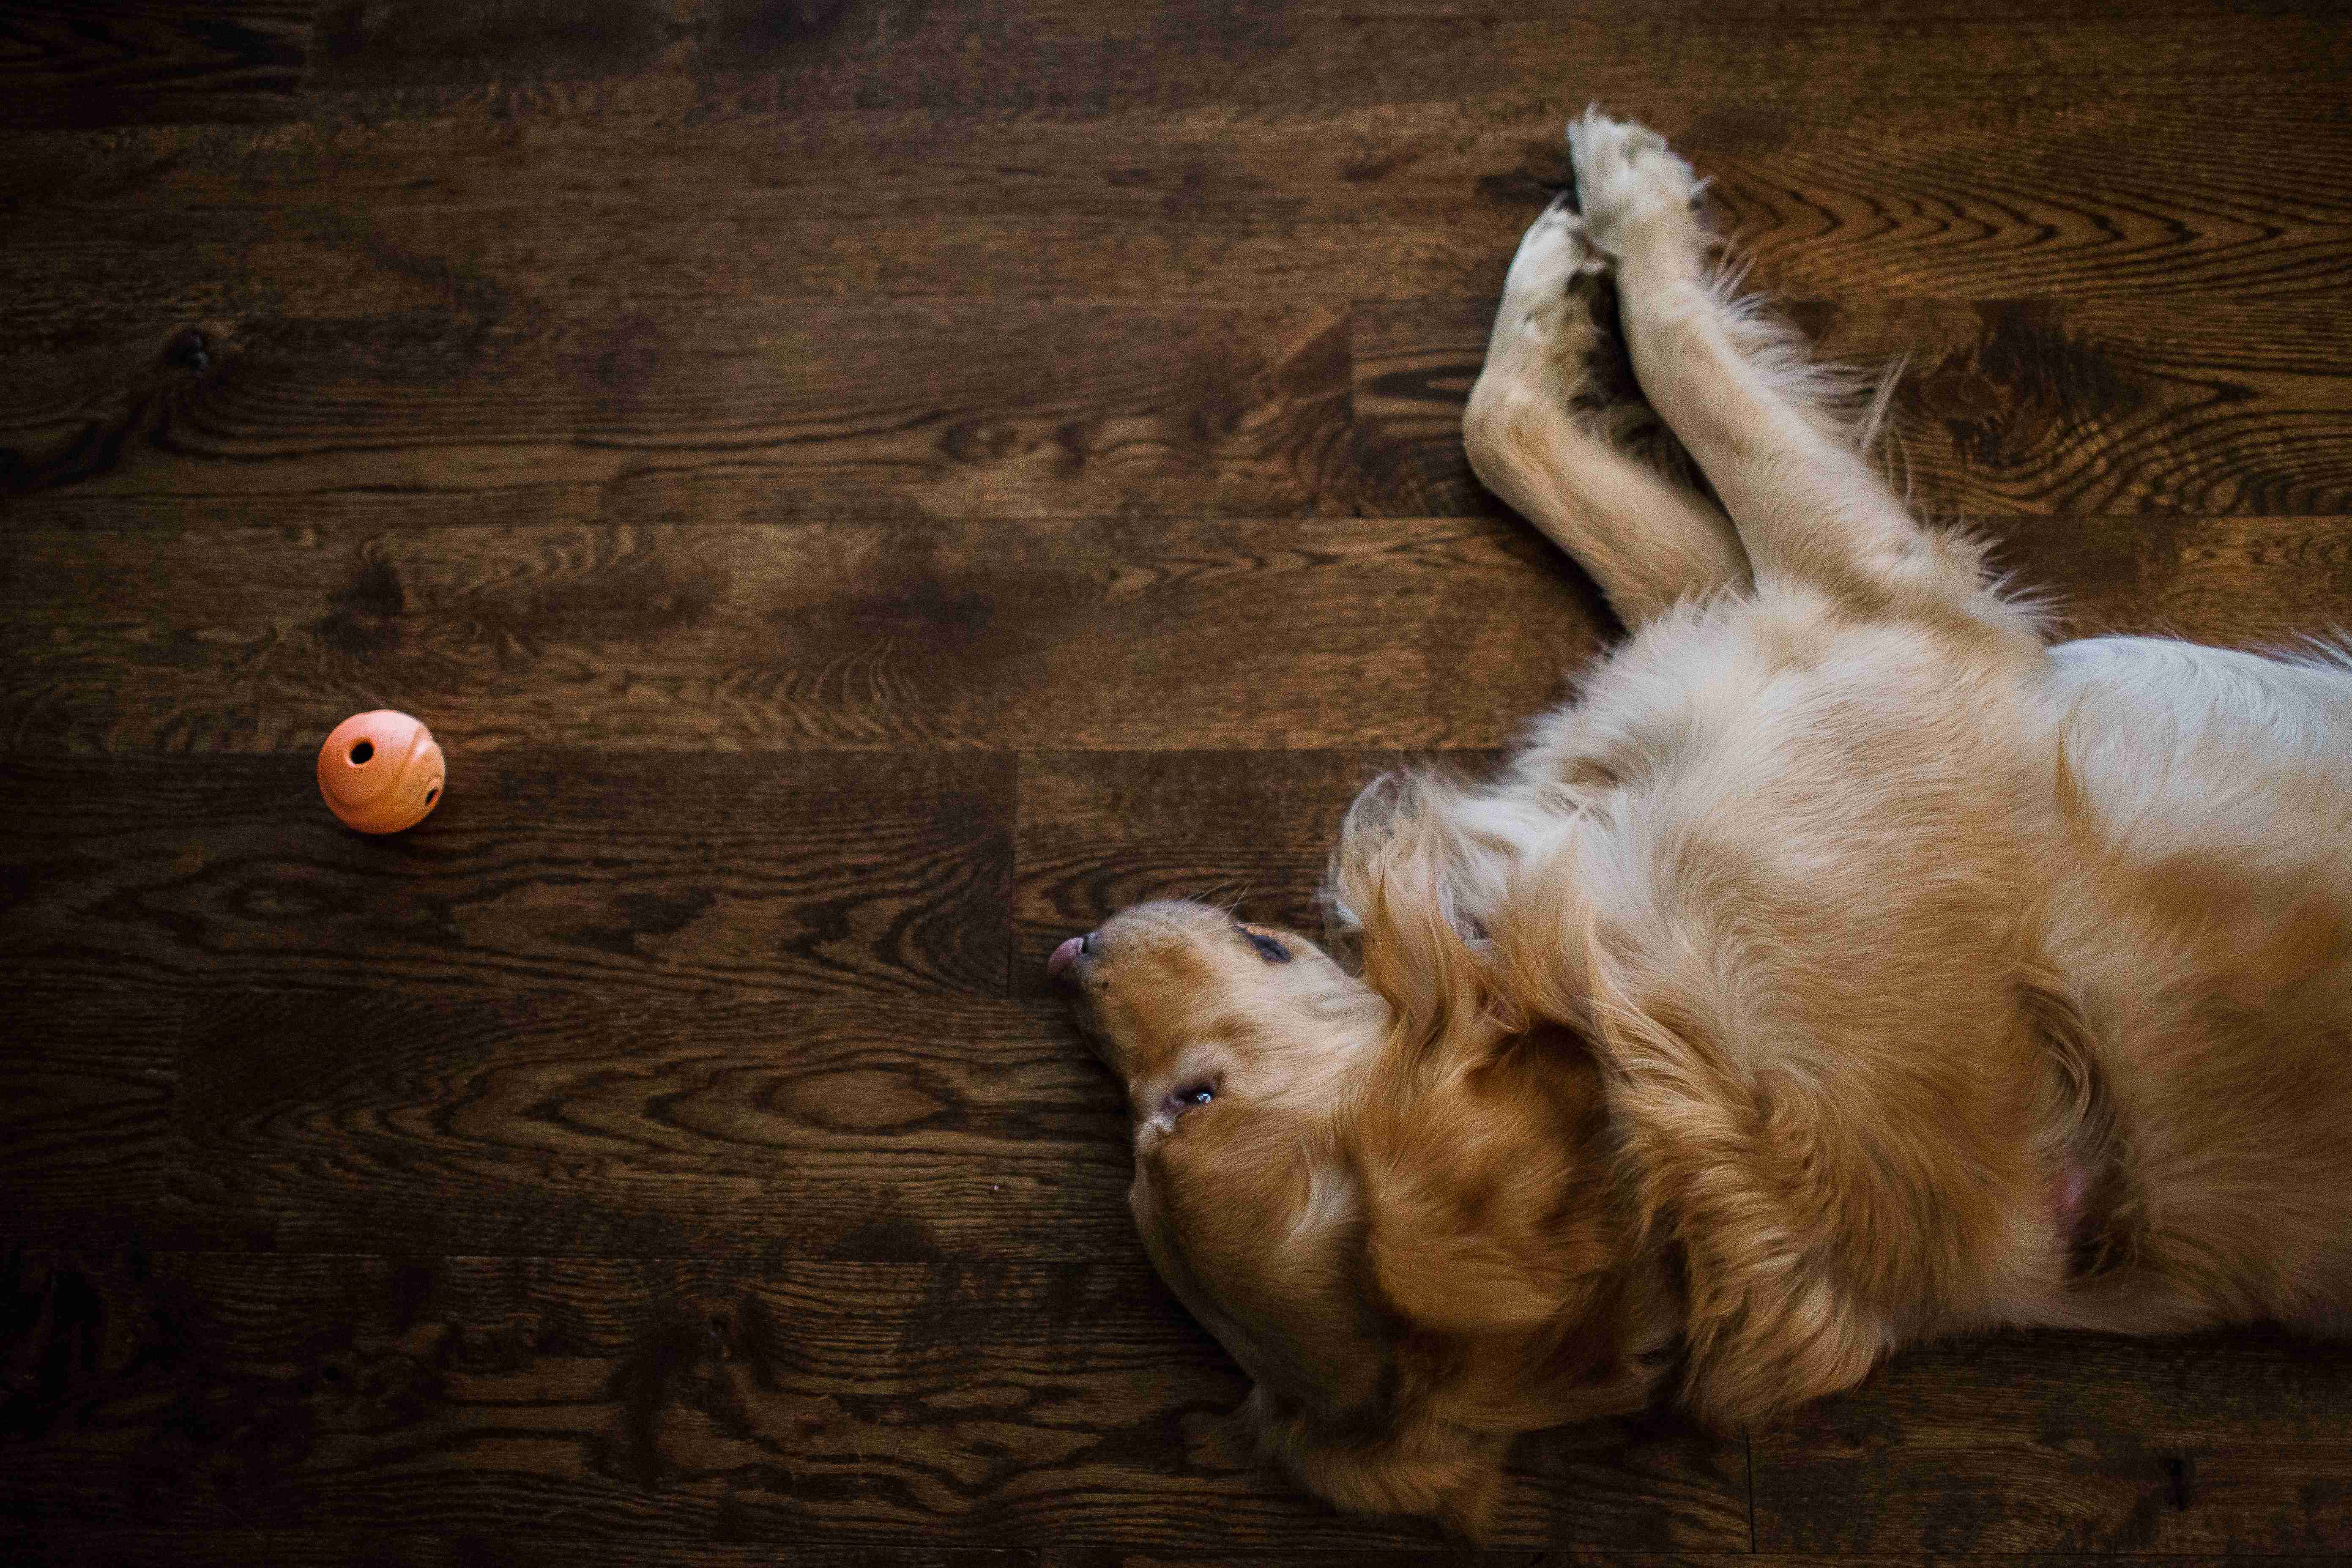 Can Golden Retrievers be trained to be good with cats or other small animals?